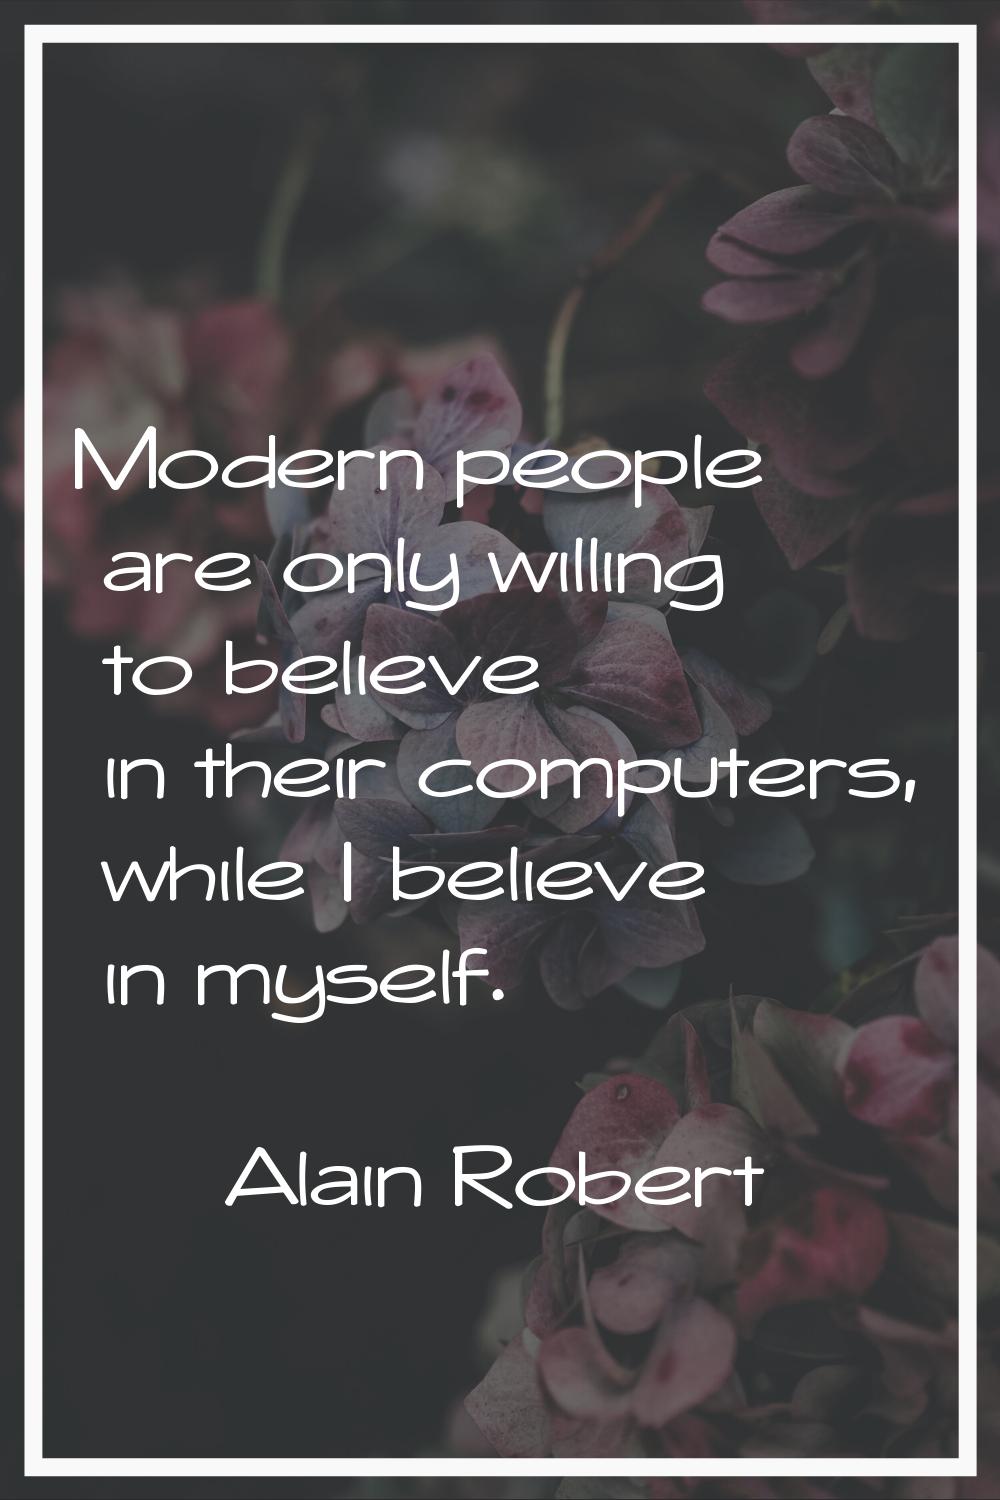 Modern people are only willing to believe in their computers, while I believe in myself.